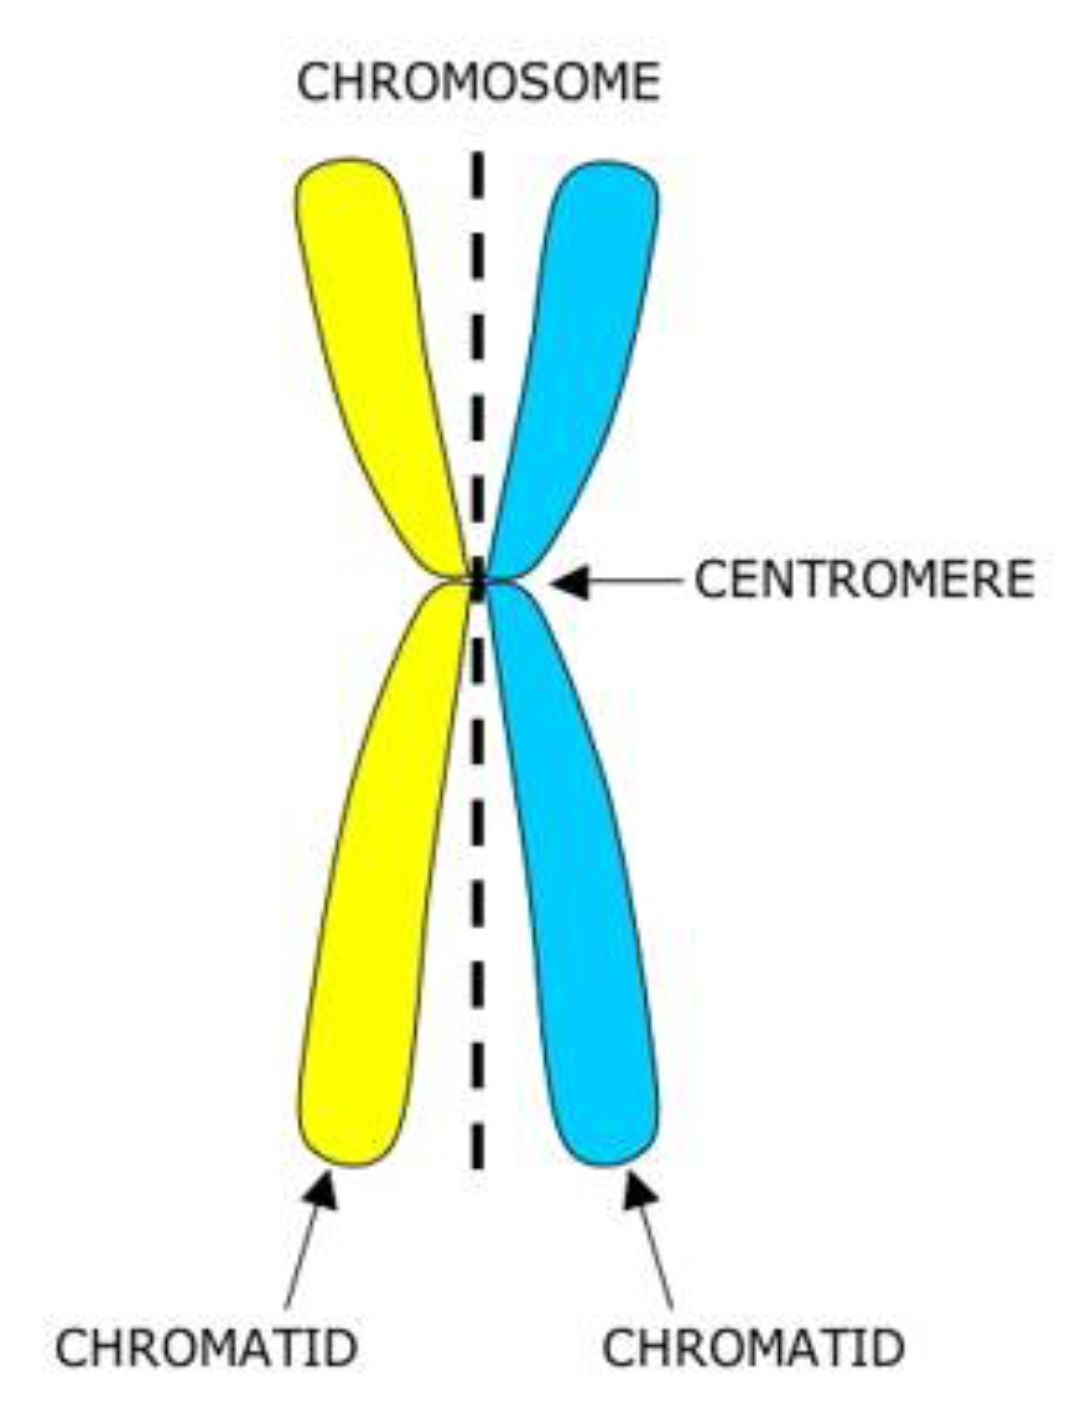 What is the name of the structure that connects the two chromatids